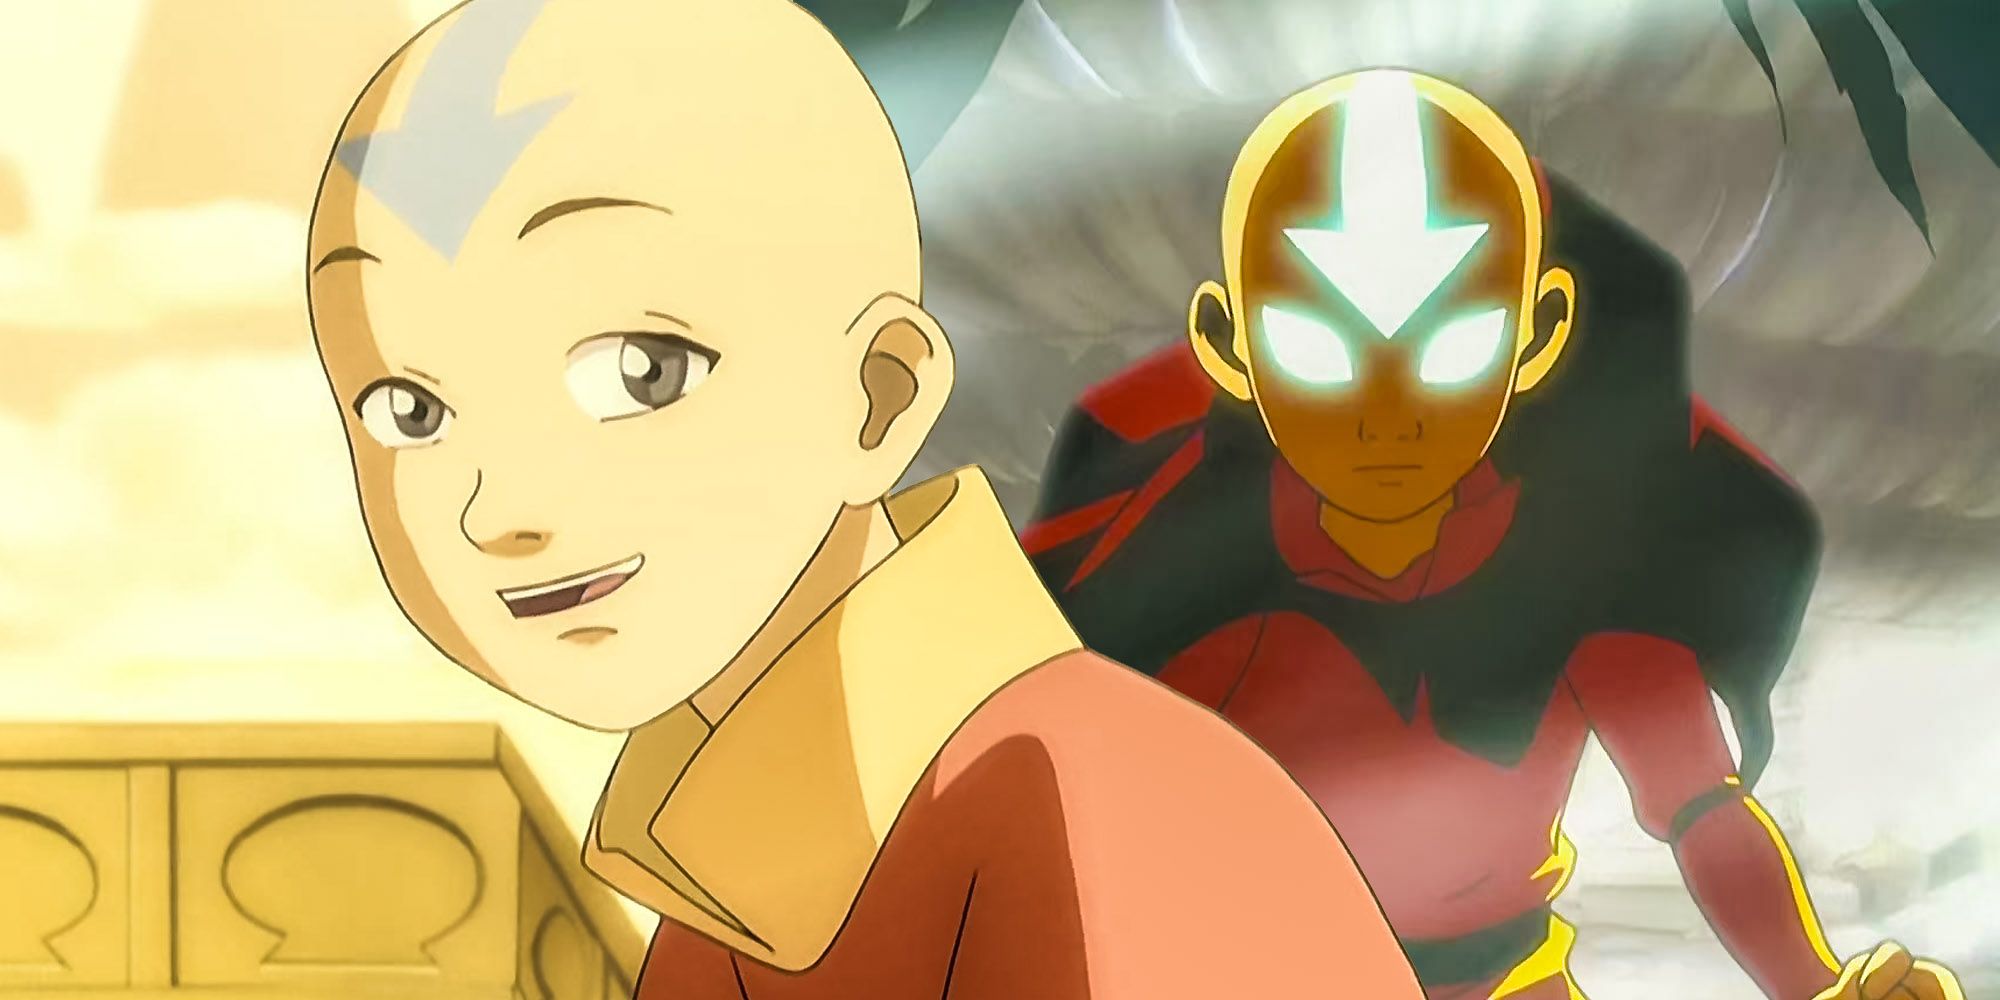 A blended image features Aang smiling and in the Avatar state in the animated Avatar The Last Airbender series